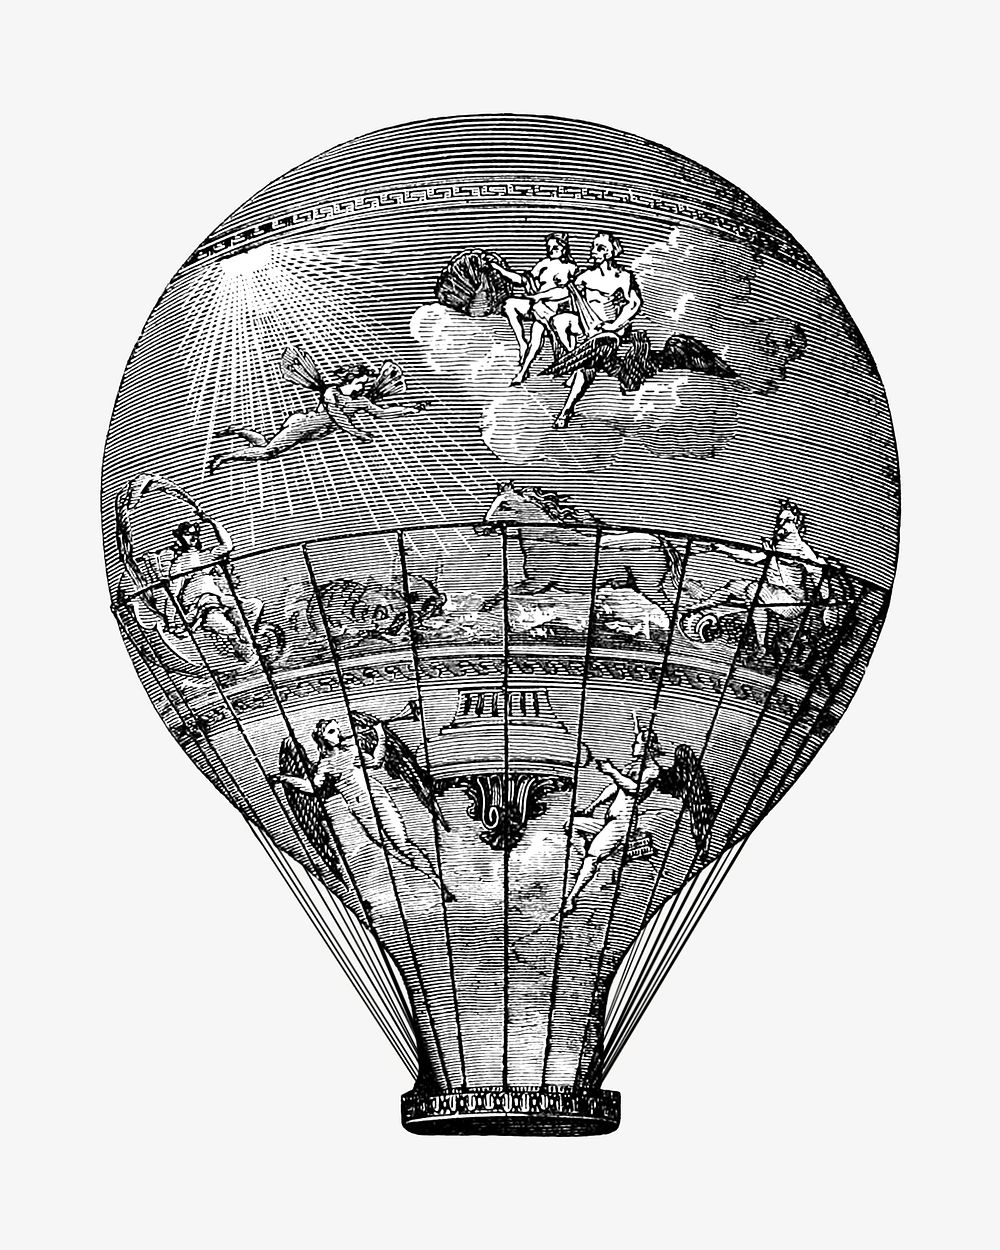 Vintage hot air balloon illustration. Remixed by rawpixel.